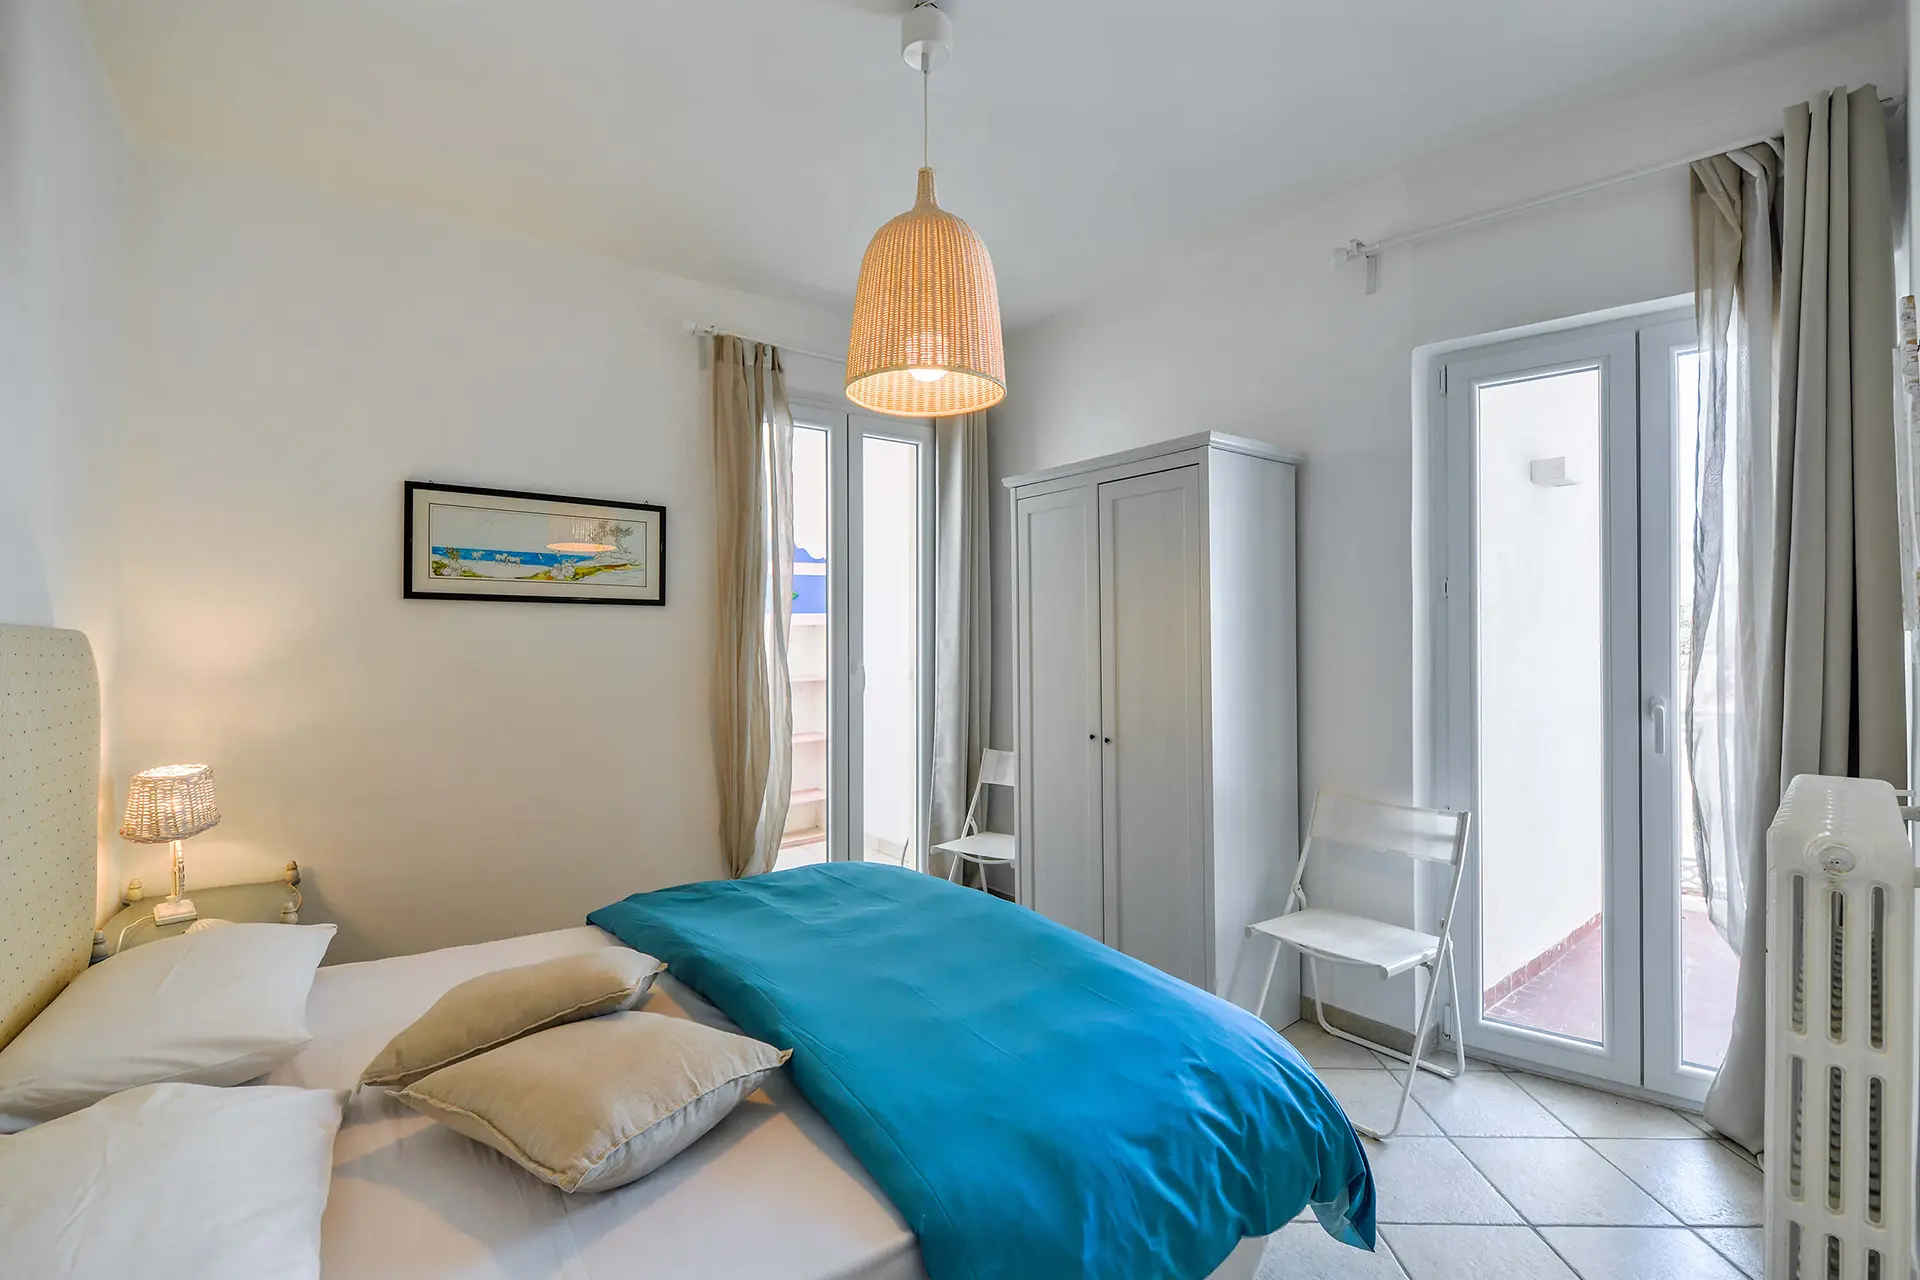 Deluxe bedroom with exclusive balcony overlooking the old town and indepent access to the solarium